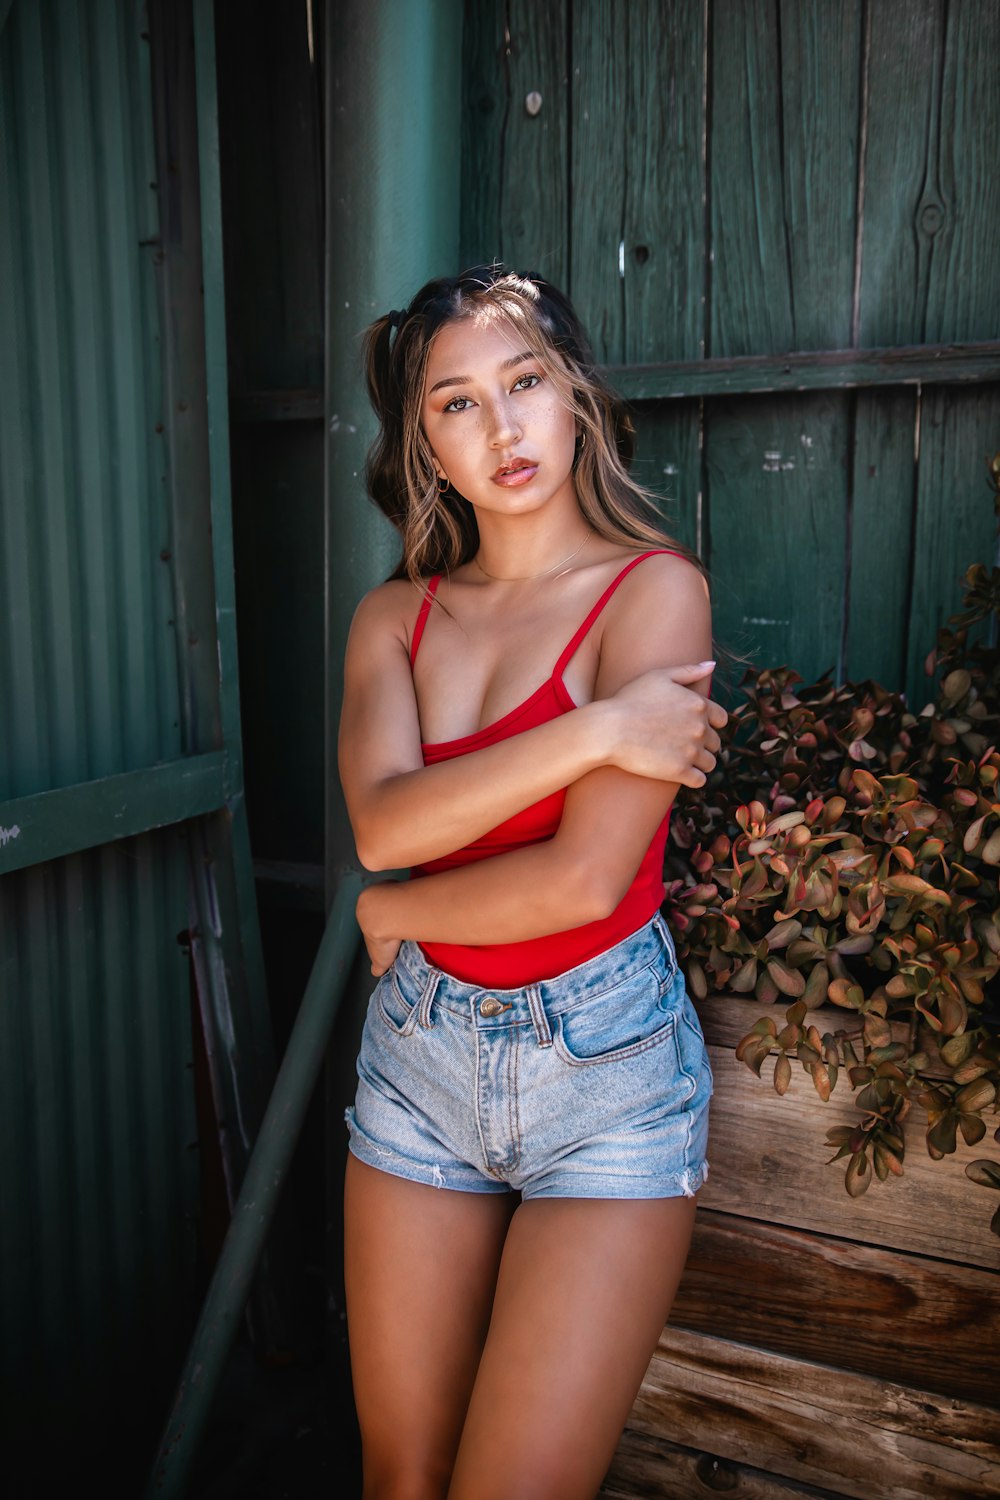 woman in red tank top and blue denim shorts standing near green wooden wall